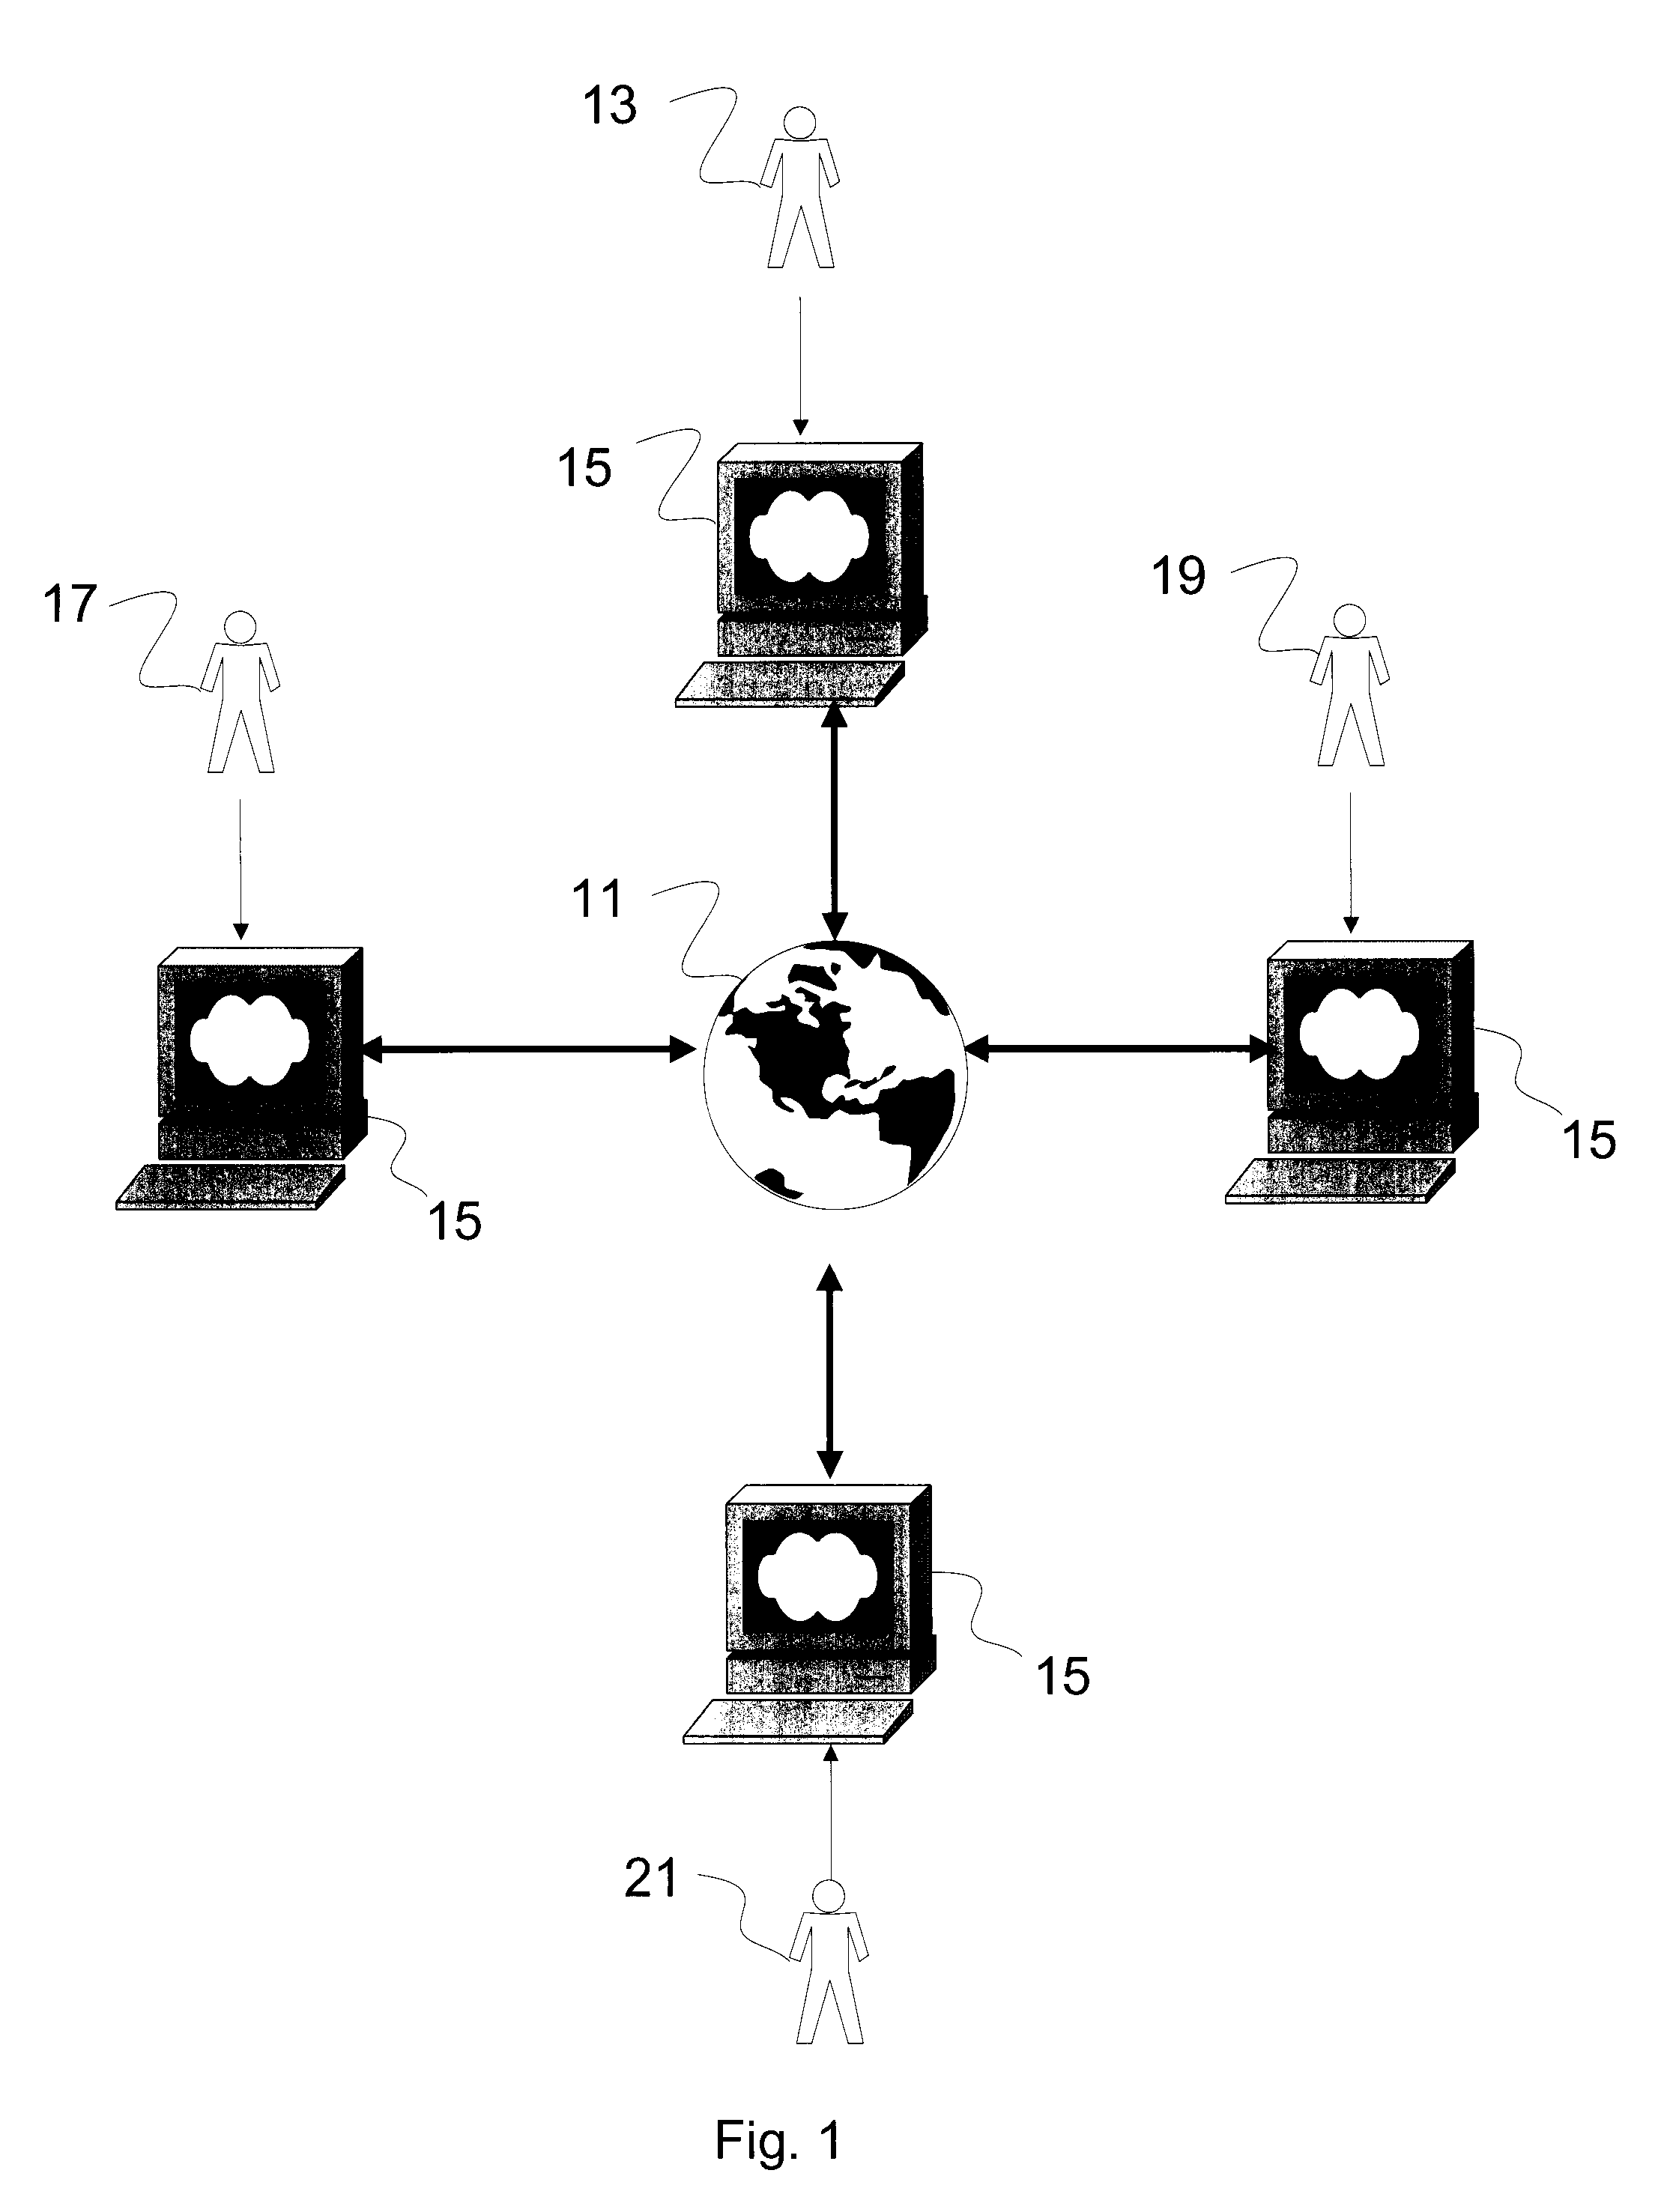 Method, system, and computer program for identification and sharing of digital images with face signatures